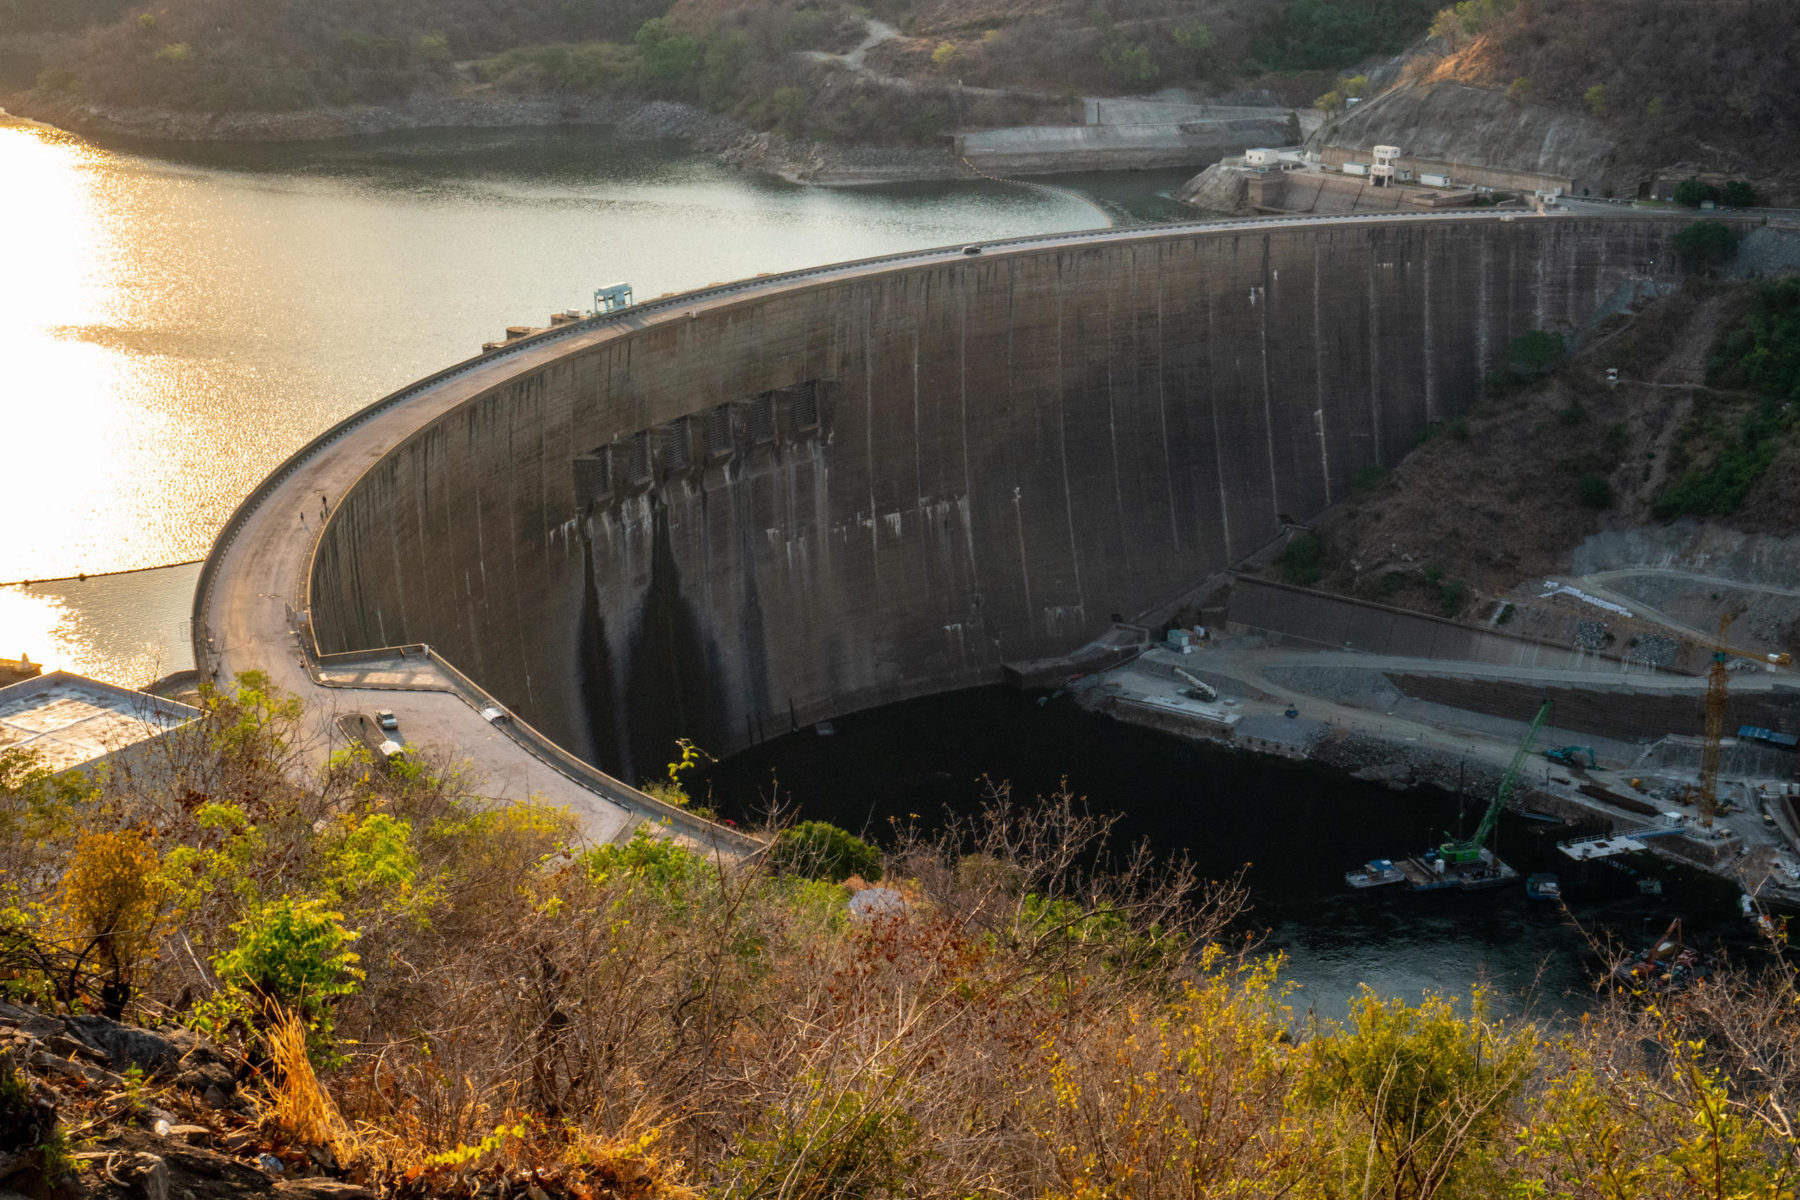 Zimbabwe has suffered serious power shortages in recent dry seasons as the reservoir behind the Kariba dam has been laid low by drought and evaporation hence the need for China Energy floating solar plant deal.